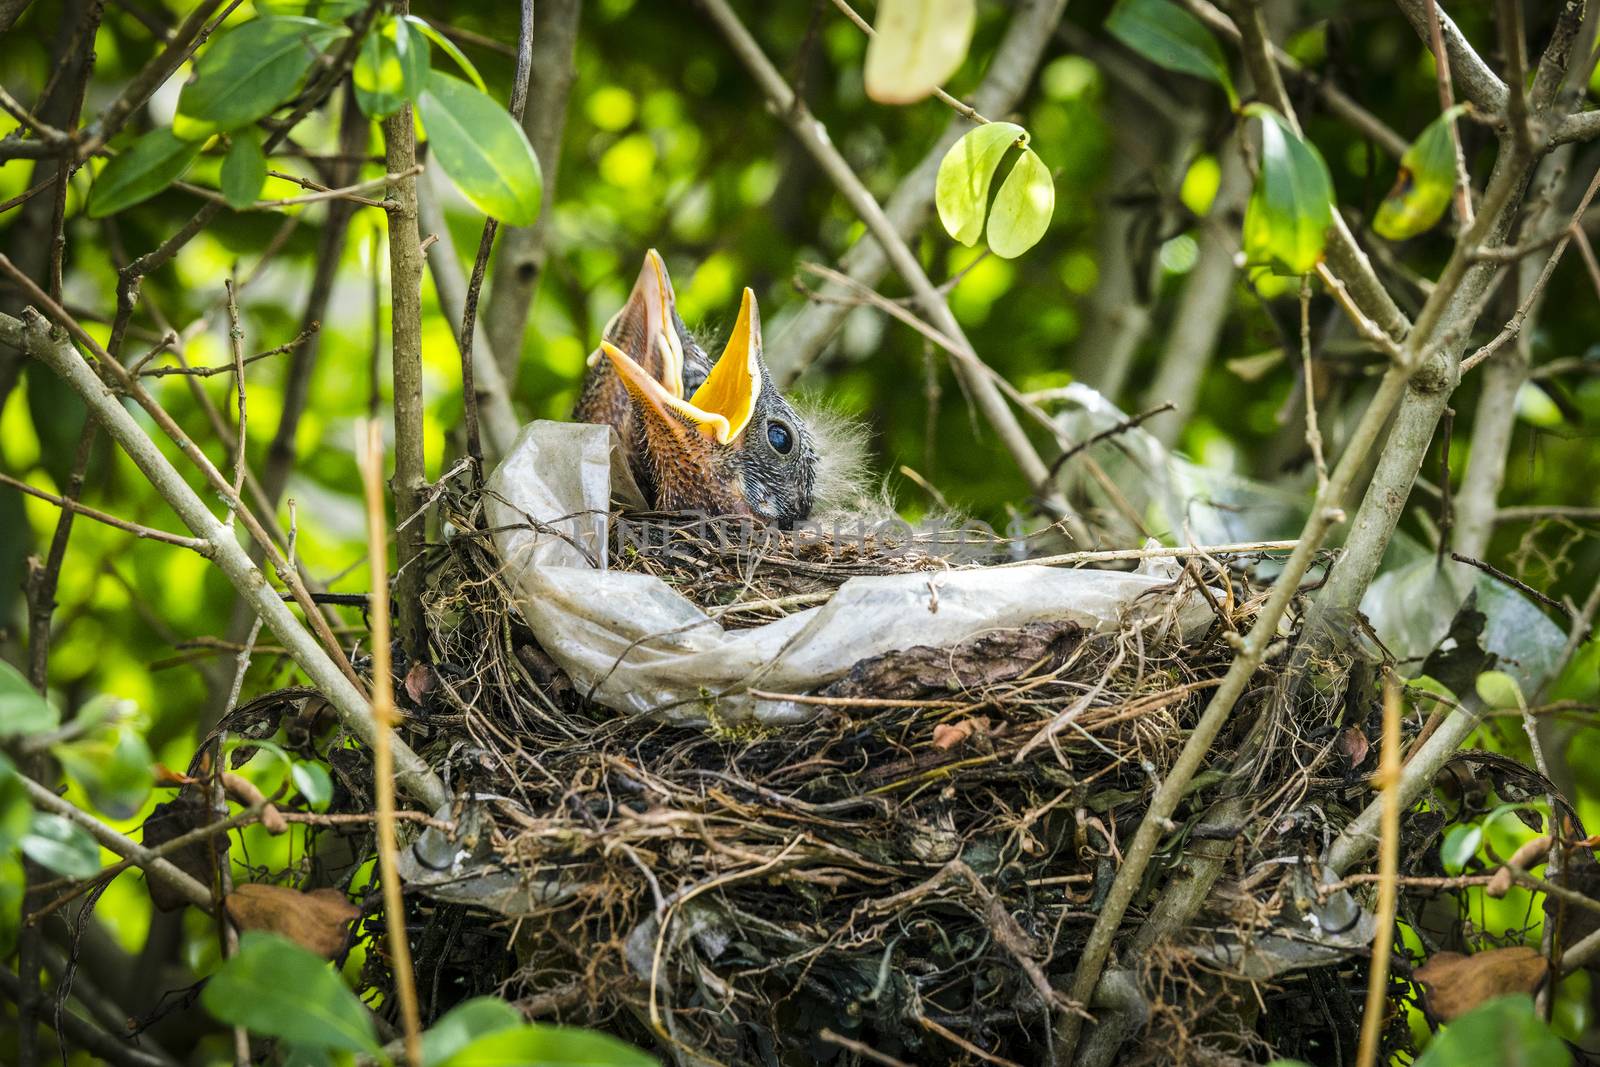 Newly hatched blackbirds in a birds nest in green nature with open beaks waiting for food